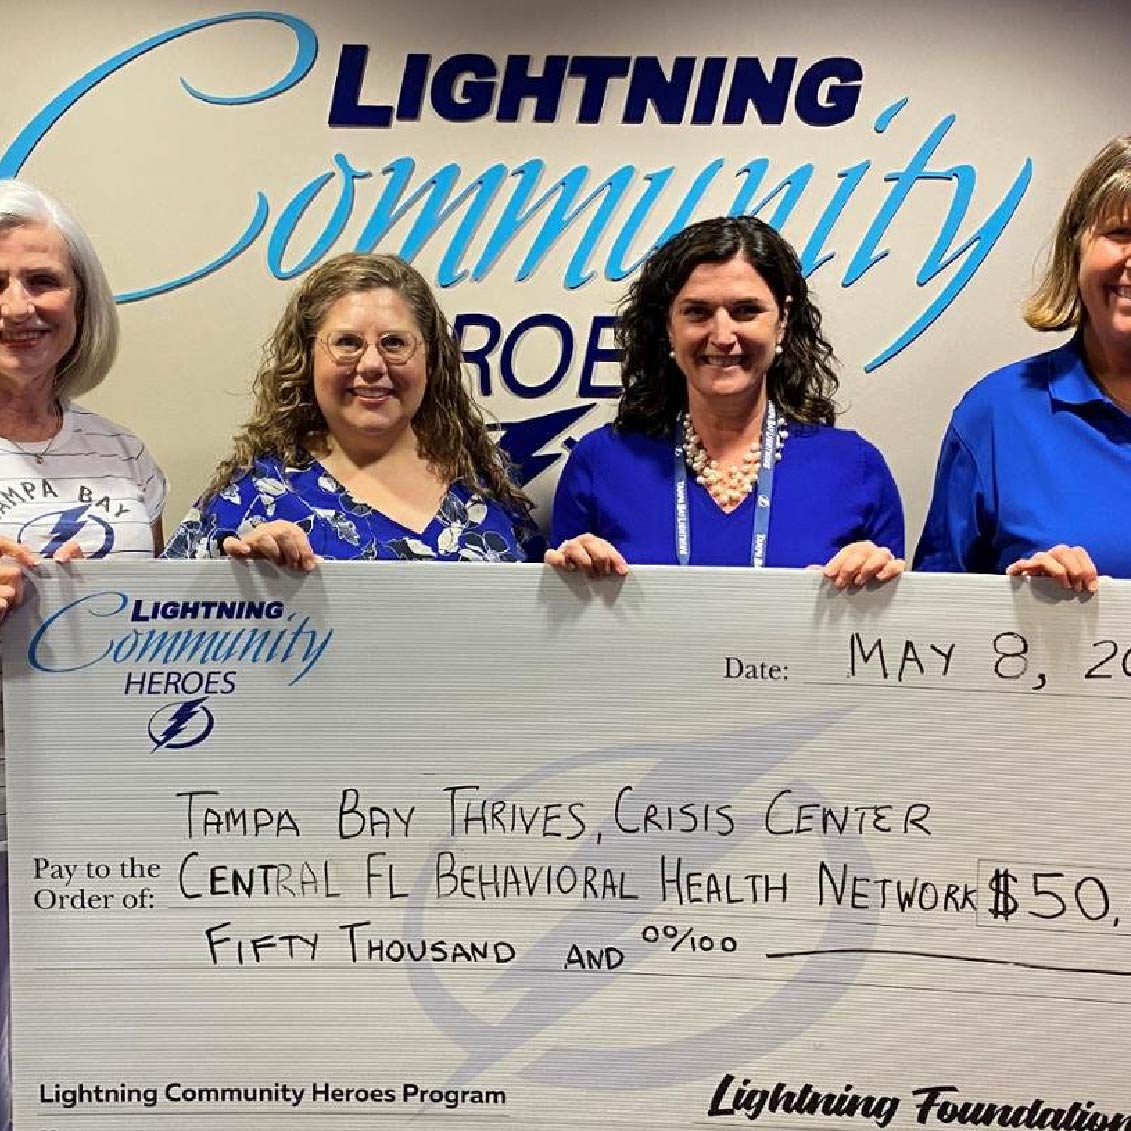 Tampa Bay Thrives receives support from Community Foundation of Tampa Bay, Tampa Bay Lightning Foundation